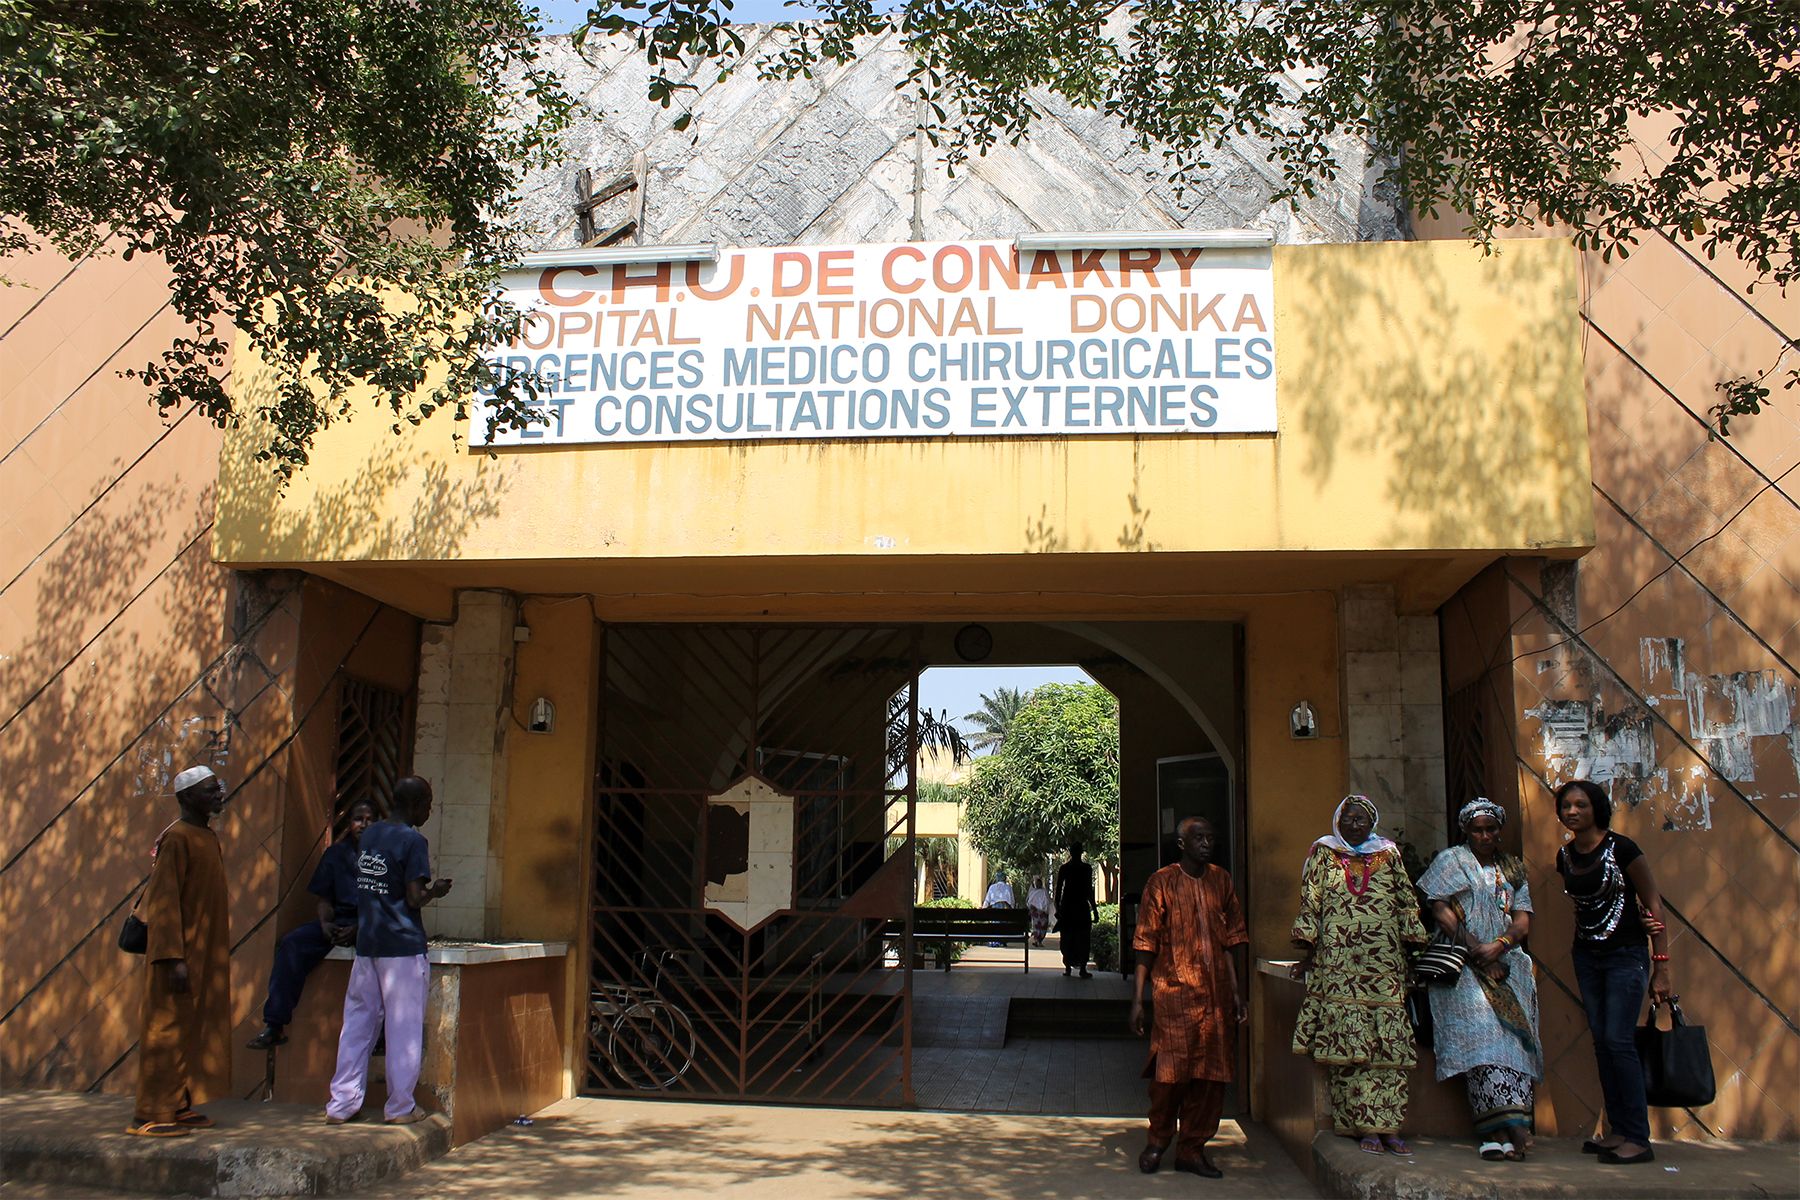 Here, we see the entrance to Donka National Hospital in Conaky, the capital of Guinea. Since the government only commits 4.7 percent of its budget to health, many hospitals and clinics, like this one—the largest government hospital in the country—operate without electricity or water and with a shortage of qualified medical professionals. The inadequate infrastructure, limited resources and poor sanitation all contribute to the high maternal and infant mortality rates. Image by Brandice Camara. Guinea, 2013.